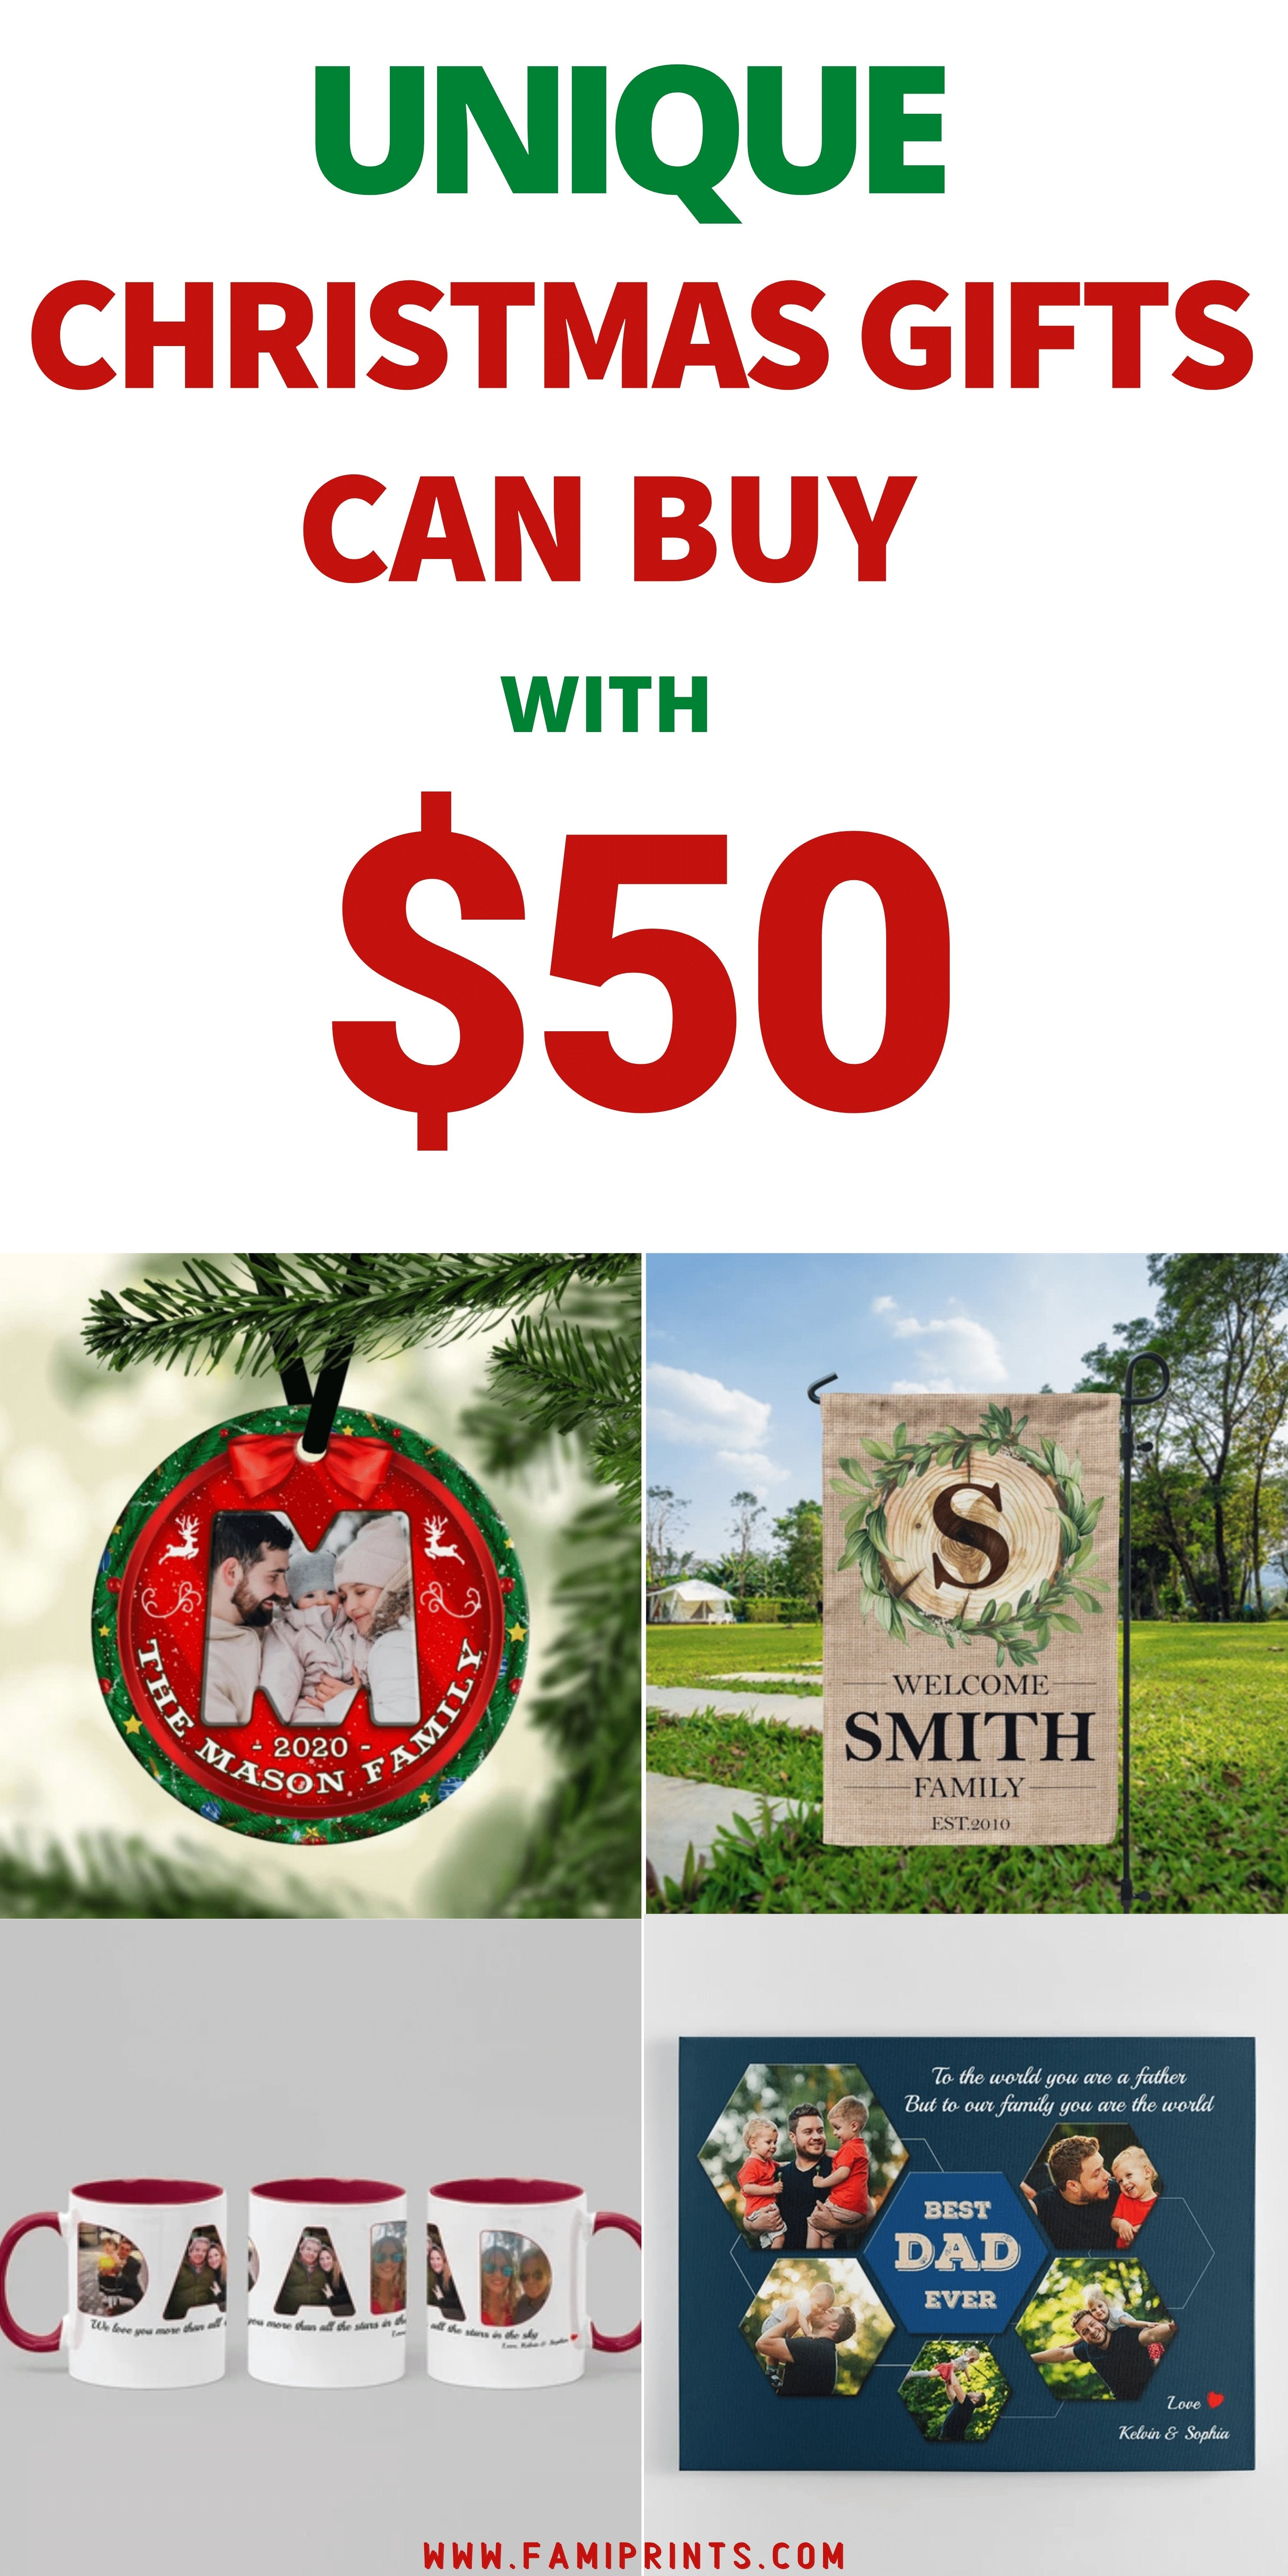 Personalized Christmas Gift Ideas Under $50 | FamiPrints | Trending Personalized Family Gifts